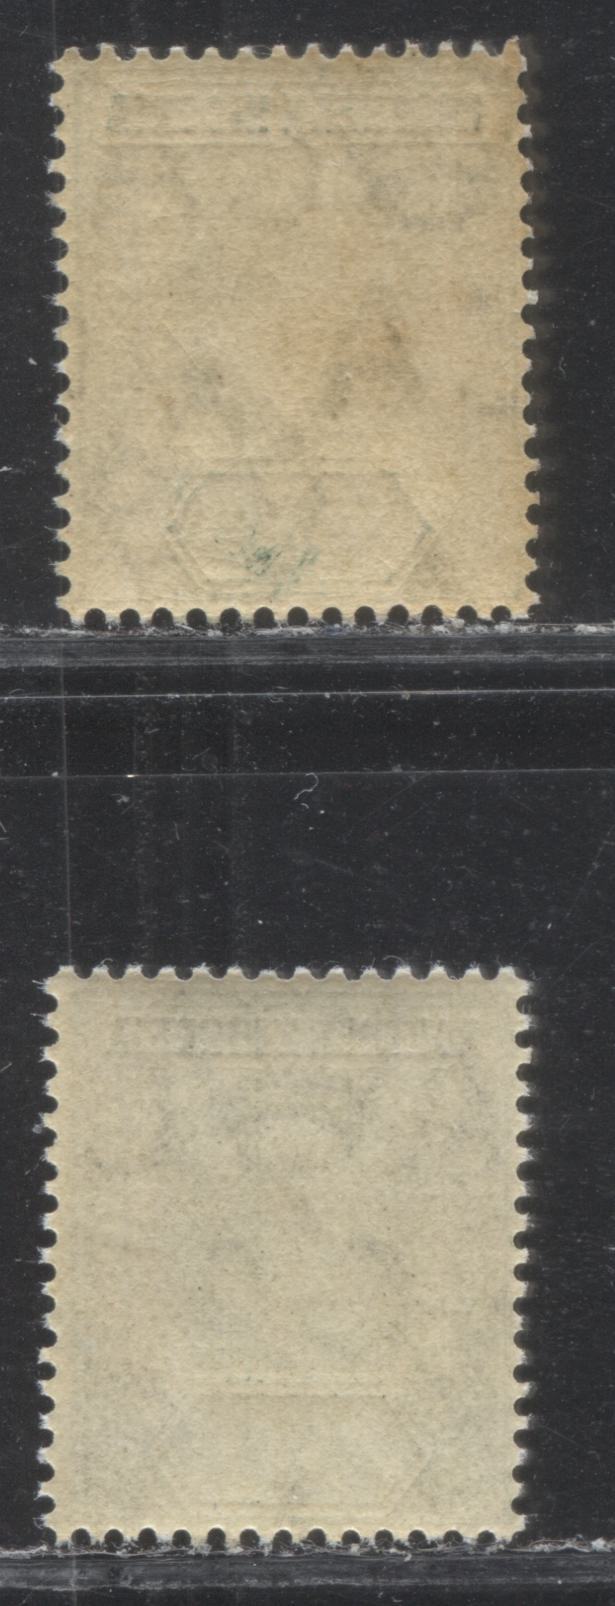 Lot 108 Northern Nigeria SG#28 1/2d Dull Green & Green and Deep Green King Edward VII 1909-1910 New Colours Imperium Keyplate Issue, Two VFNH Examples, On Ordinary Paper, 364,680 Issued, SG Cat. 4 GBP = Approximately $6.8 For Fine OG, Est. $12